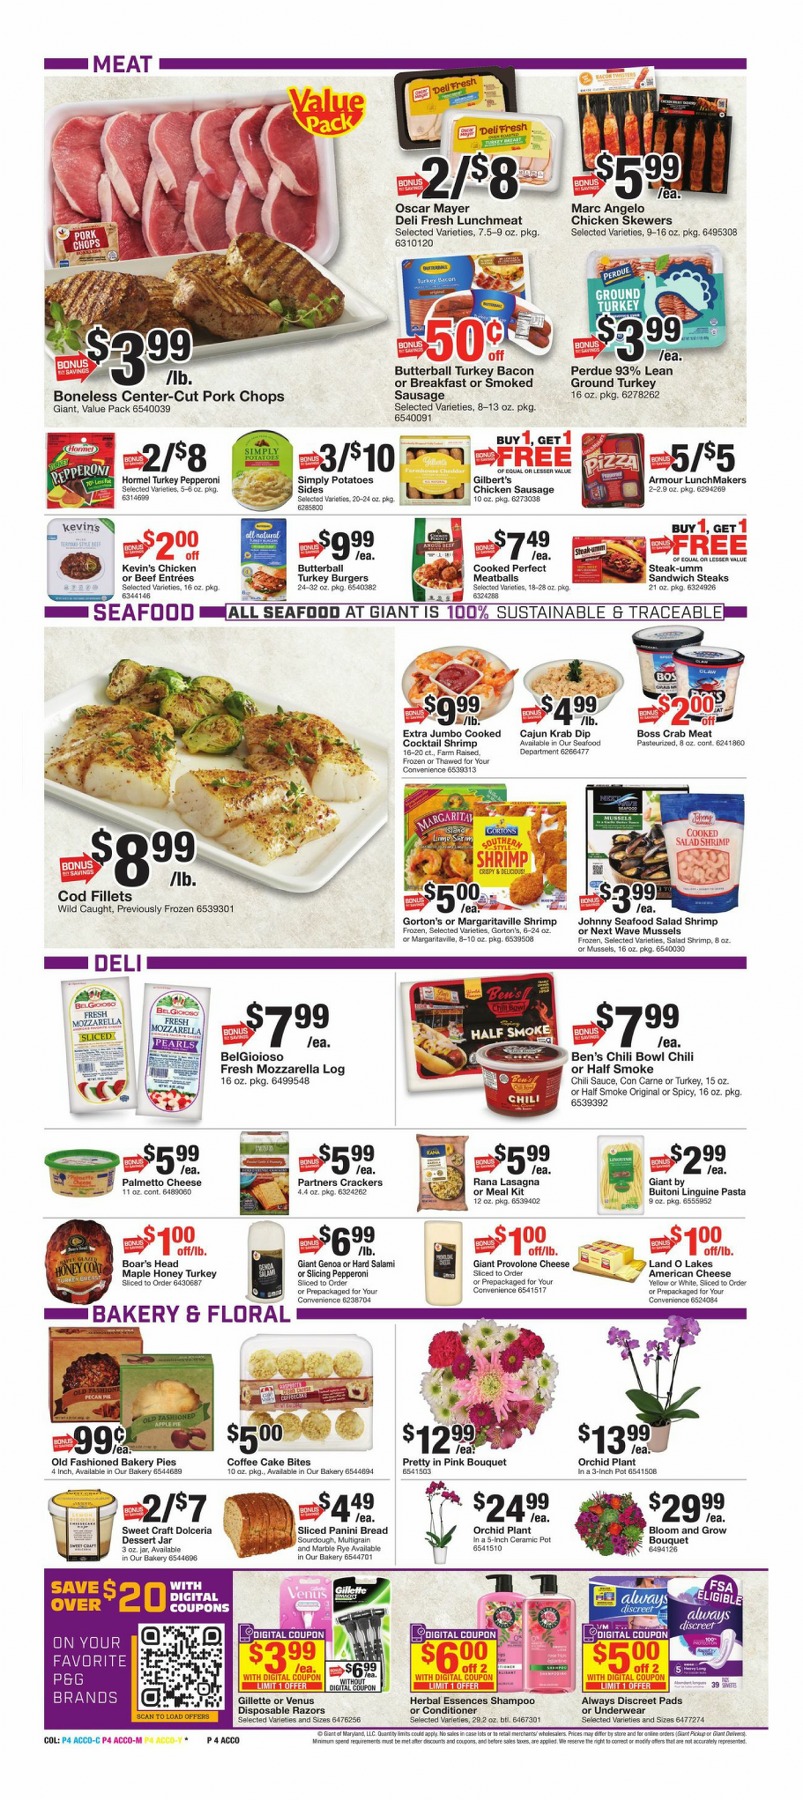 piggly wiggly weekly ad in dothan eagle